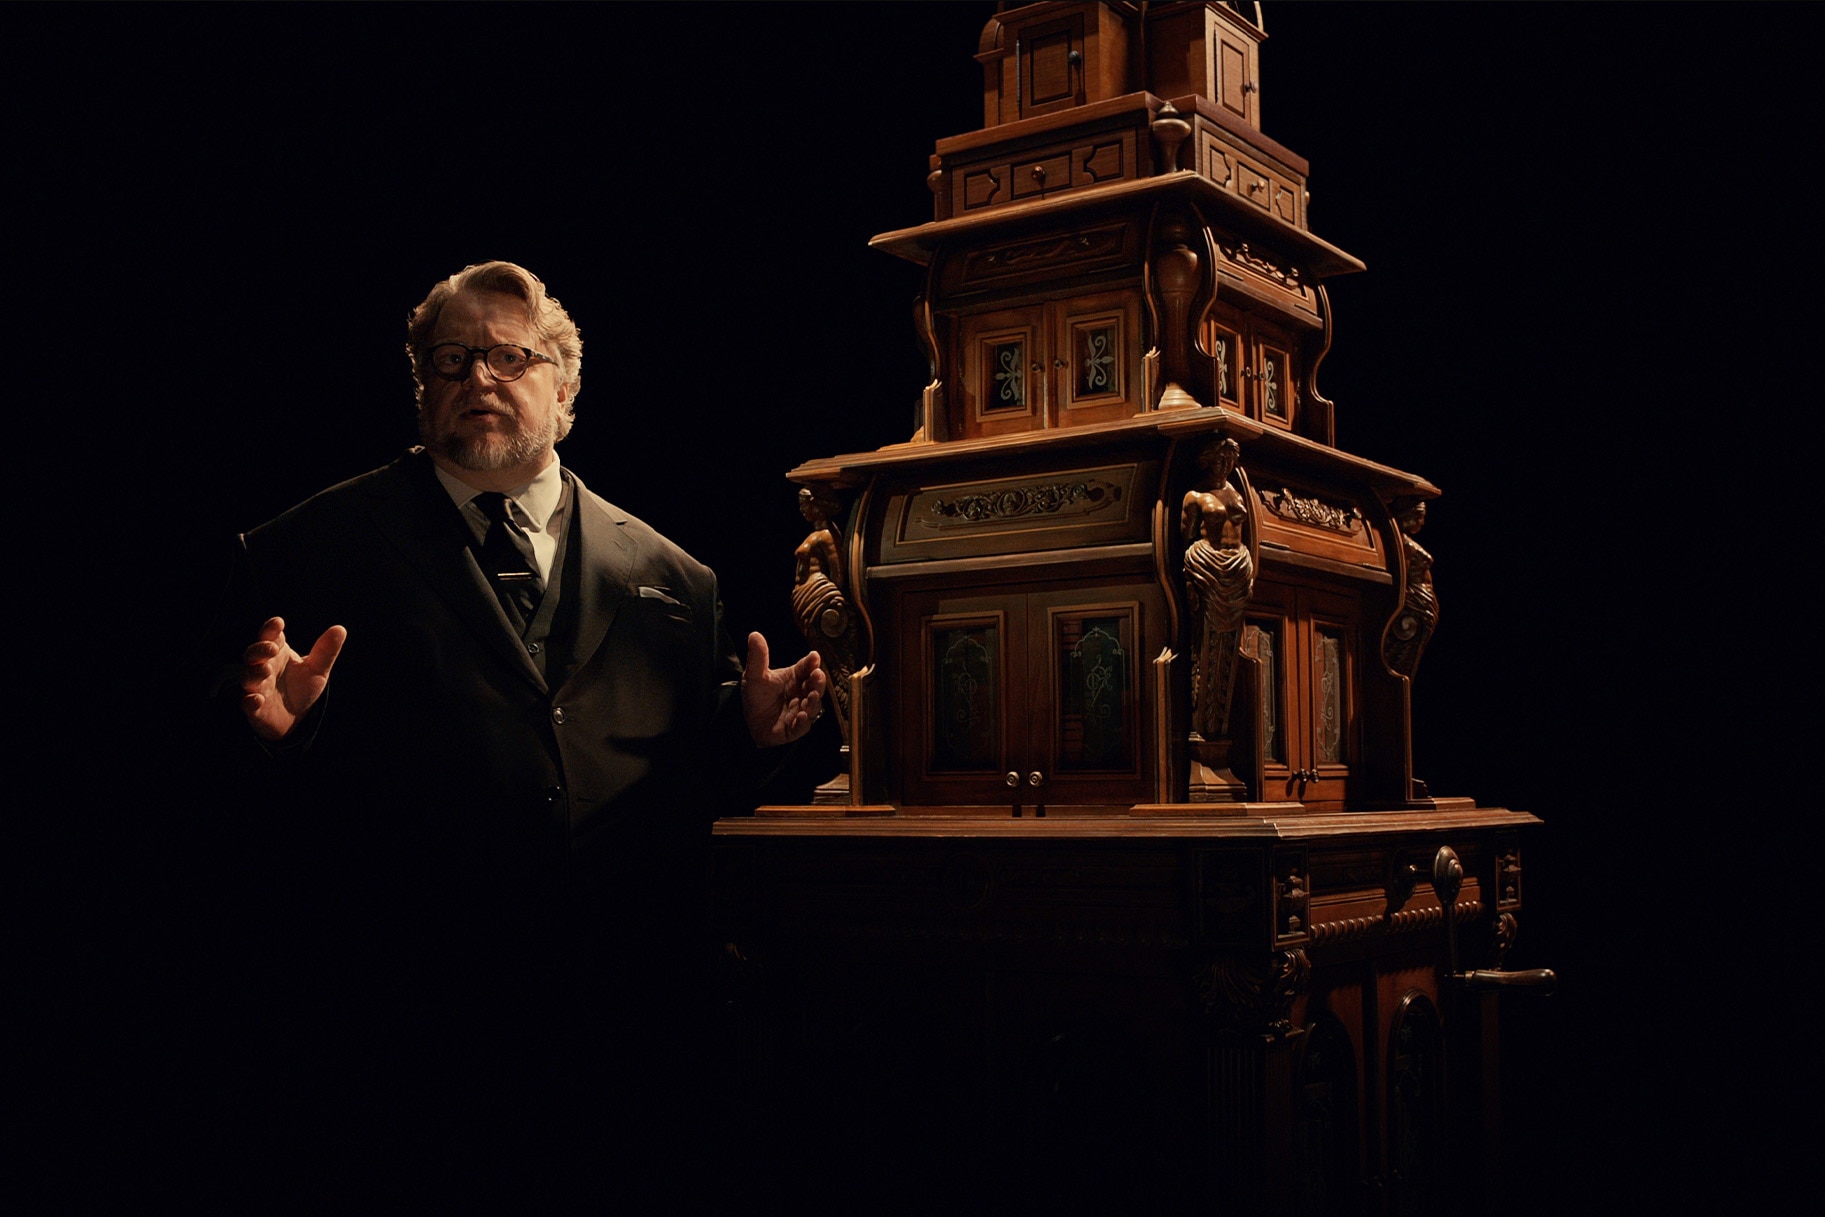 Guillermo del Toro and the Cabinet of Curiosities